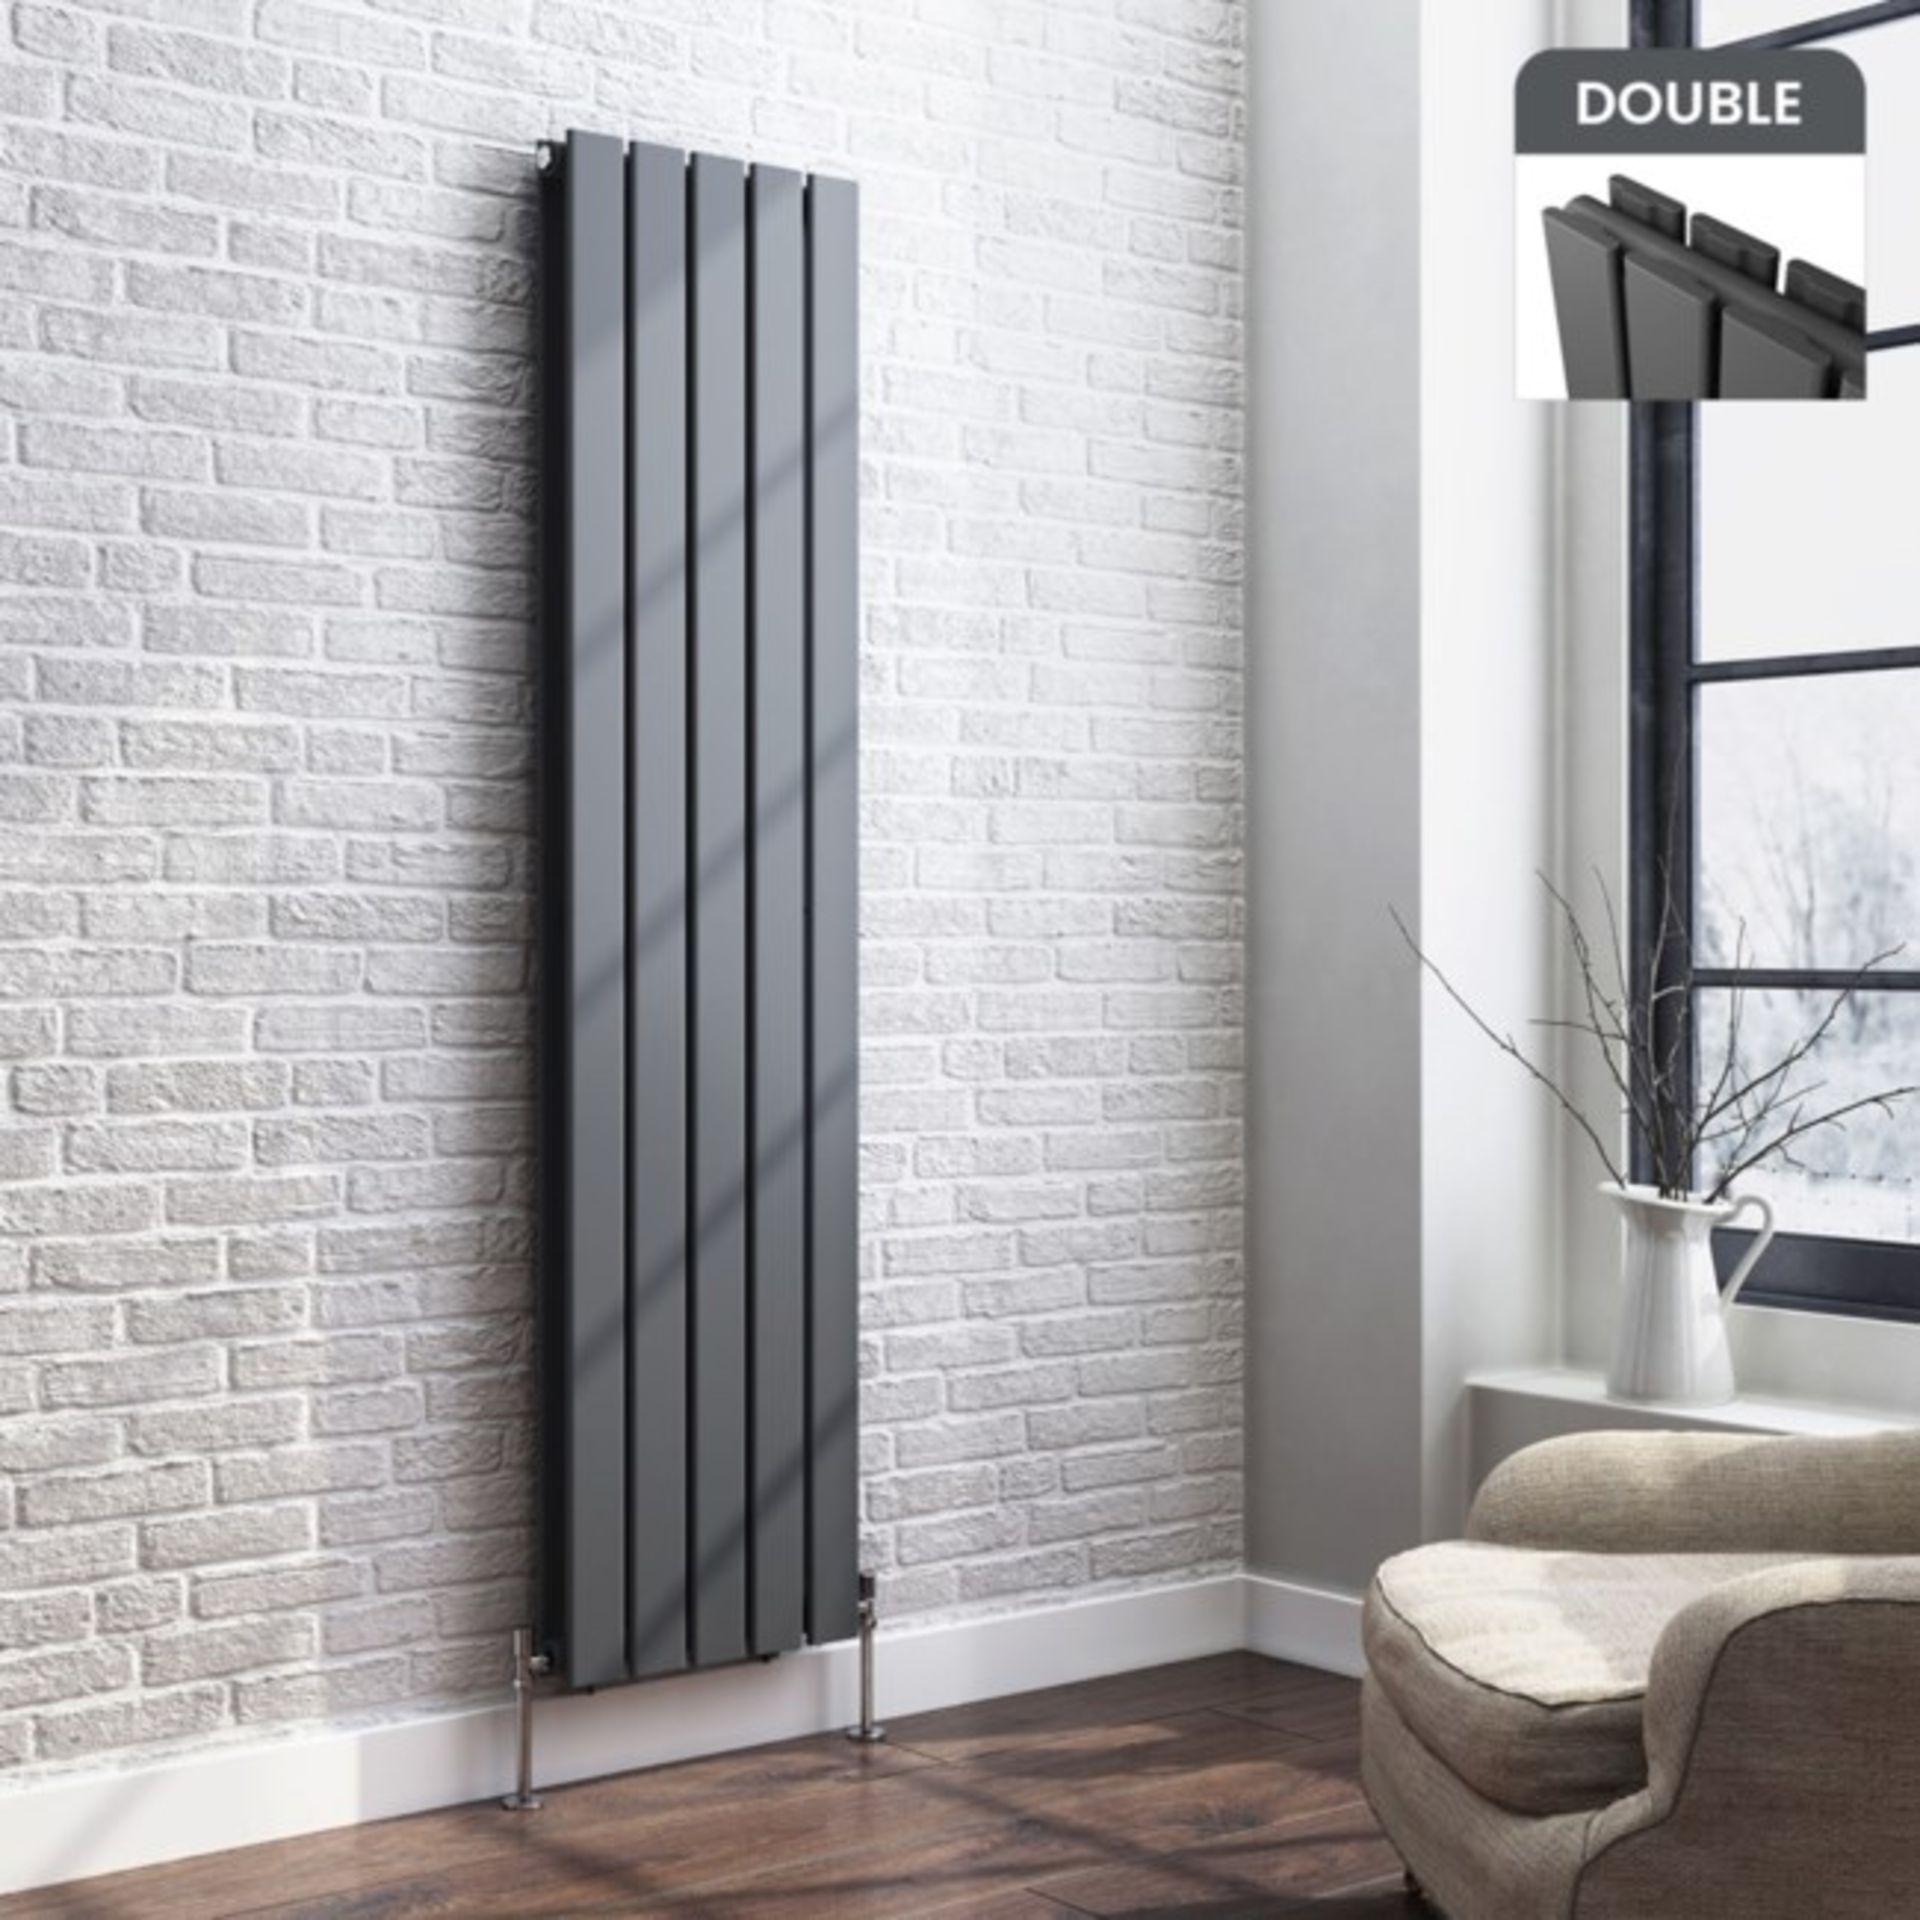 1600x360mm Anthracite Double Flat Panel Vertical Radiator.RRP £449.99.Made with low carbon ste...